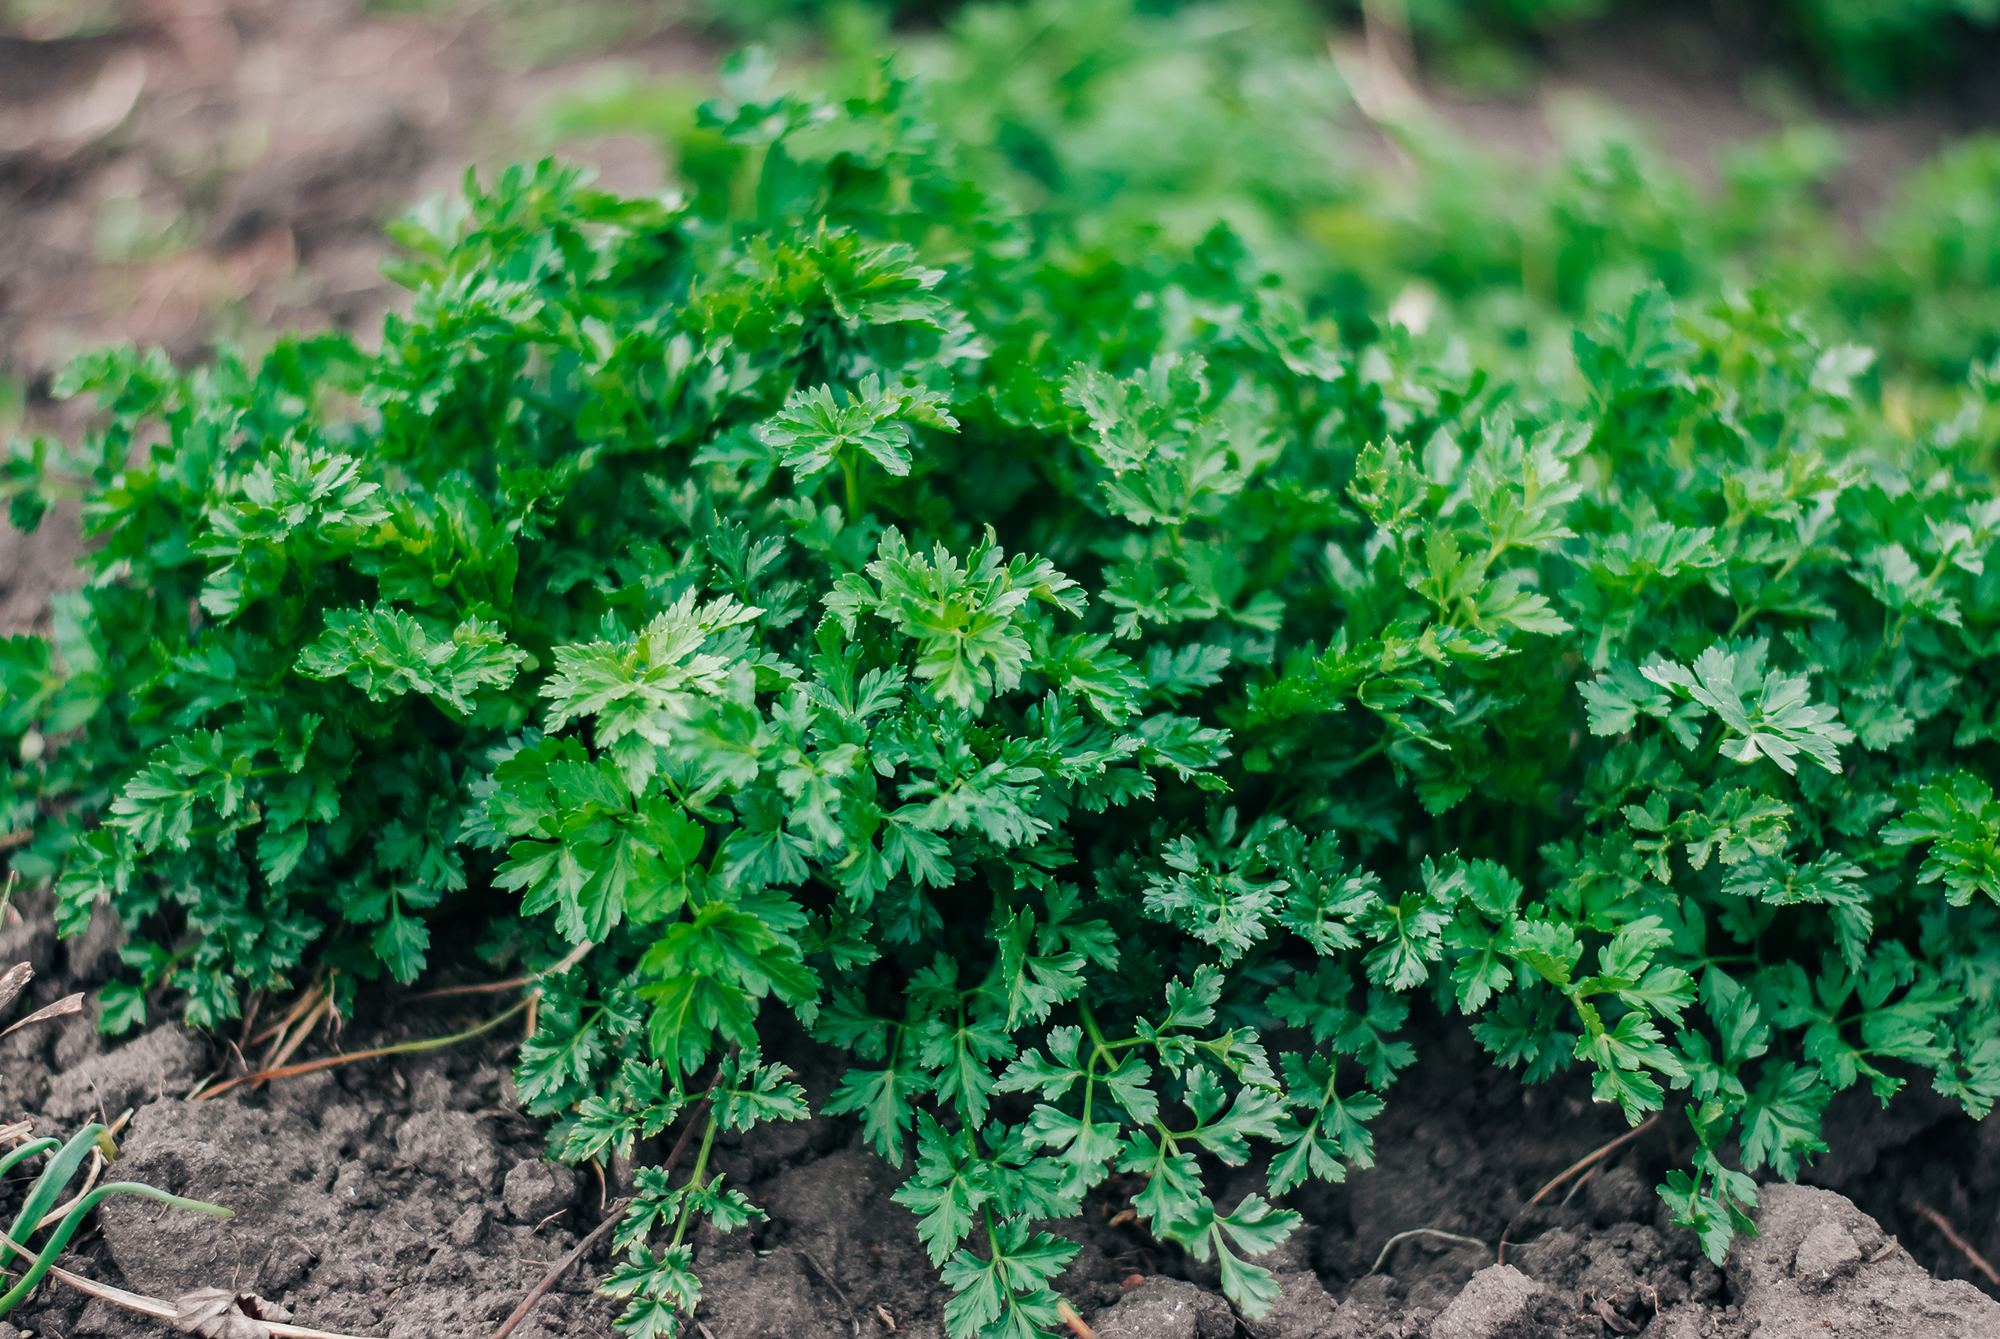 Parsley growing outside